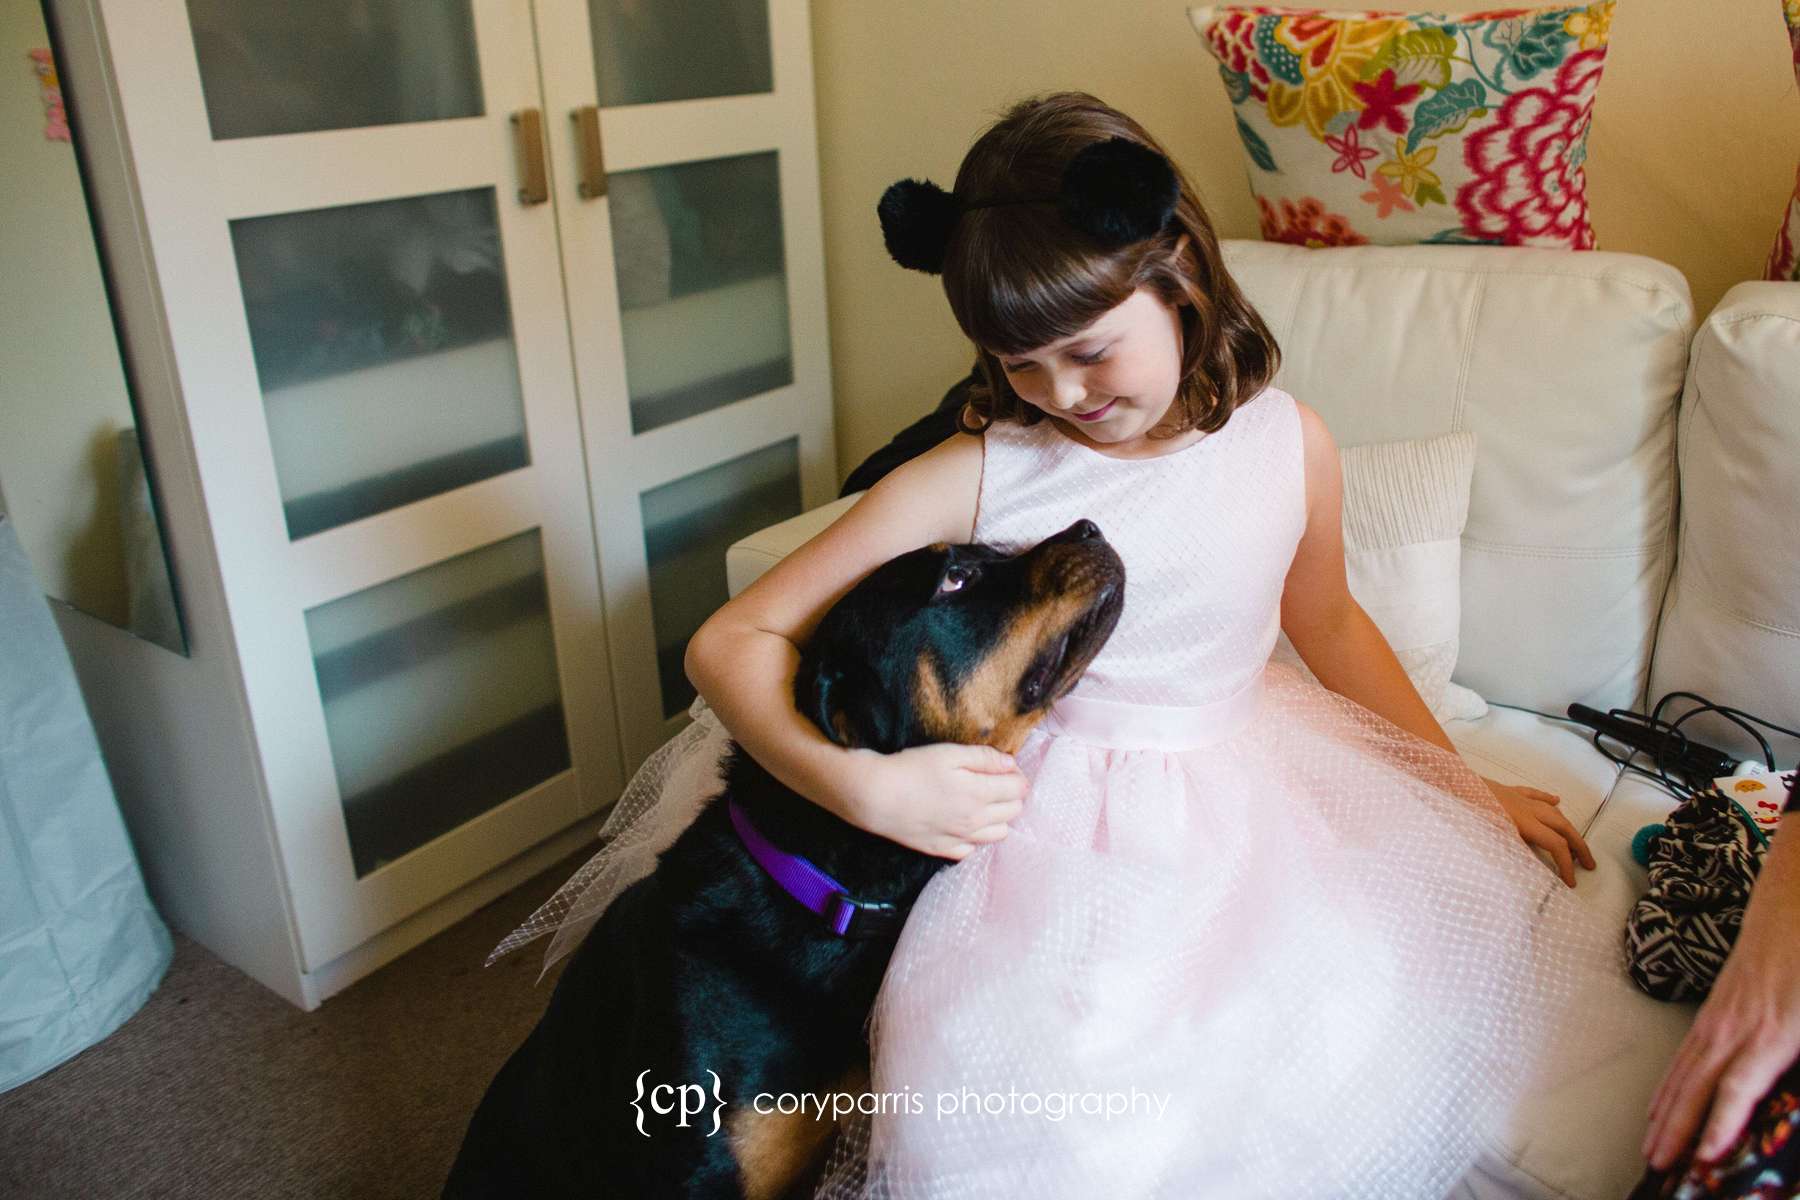  Flower girl and the puppy! I love the way they are looking at each other. So cute. 